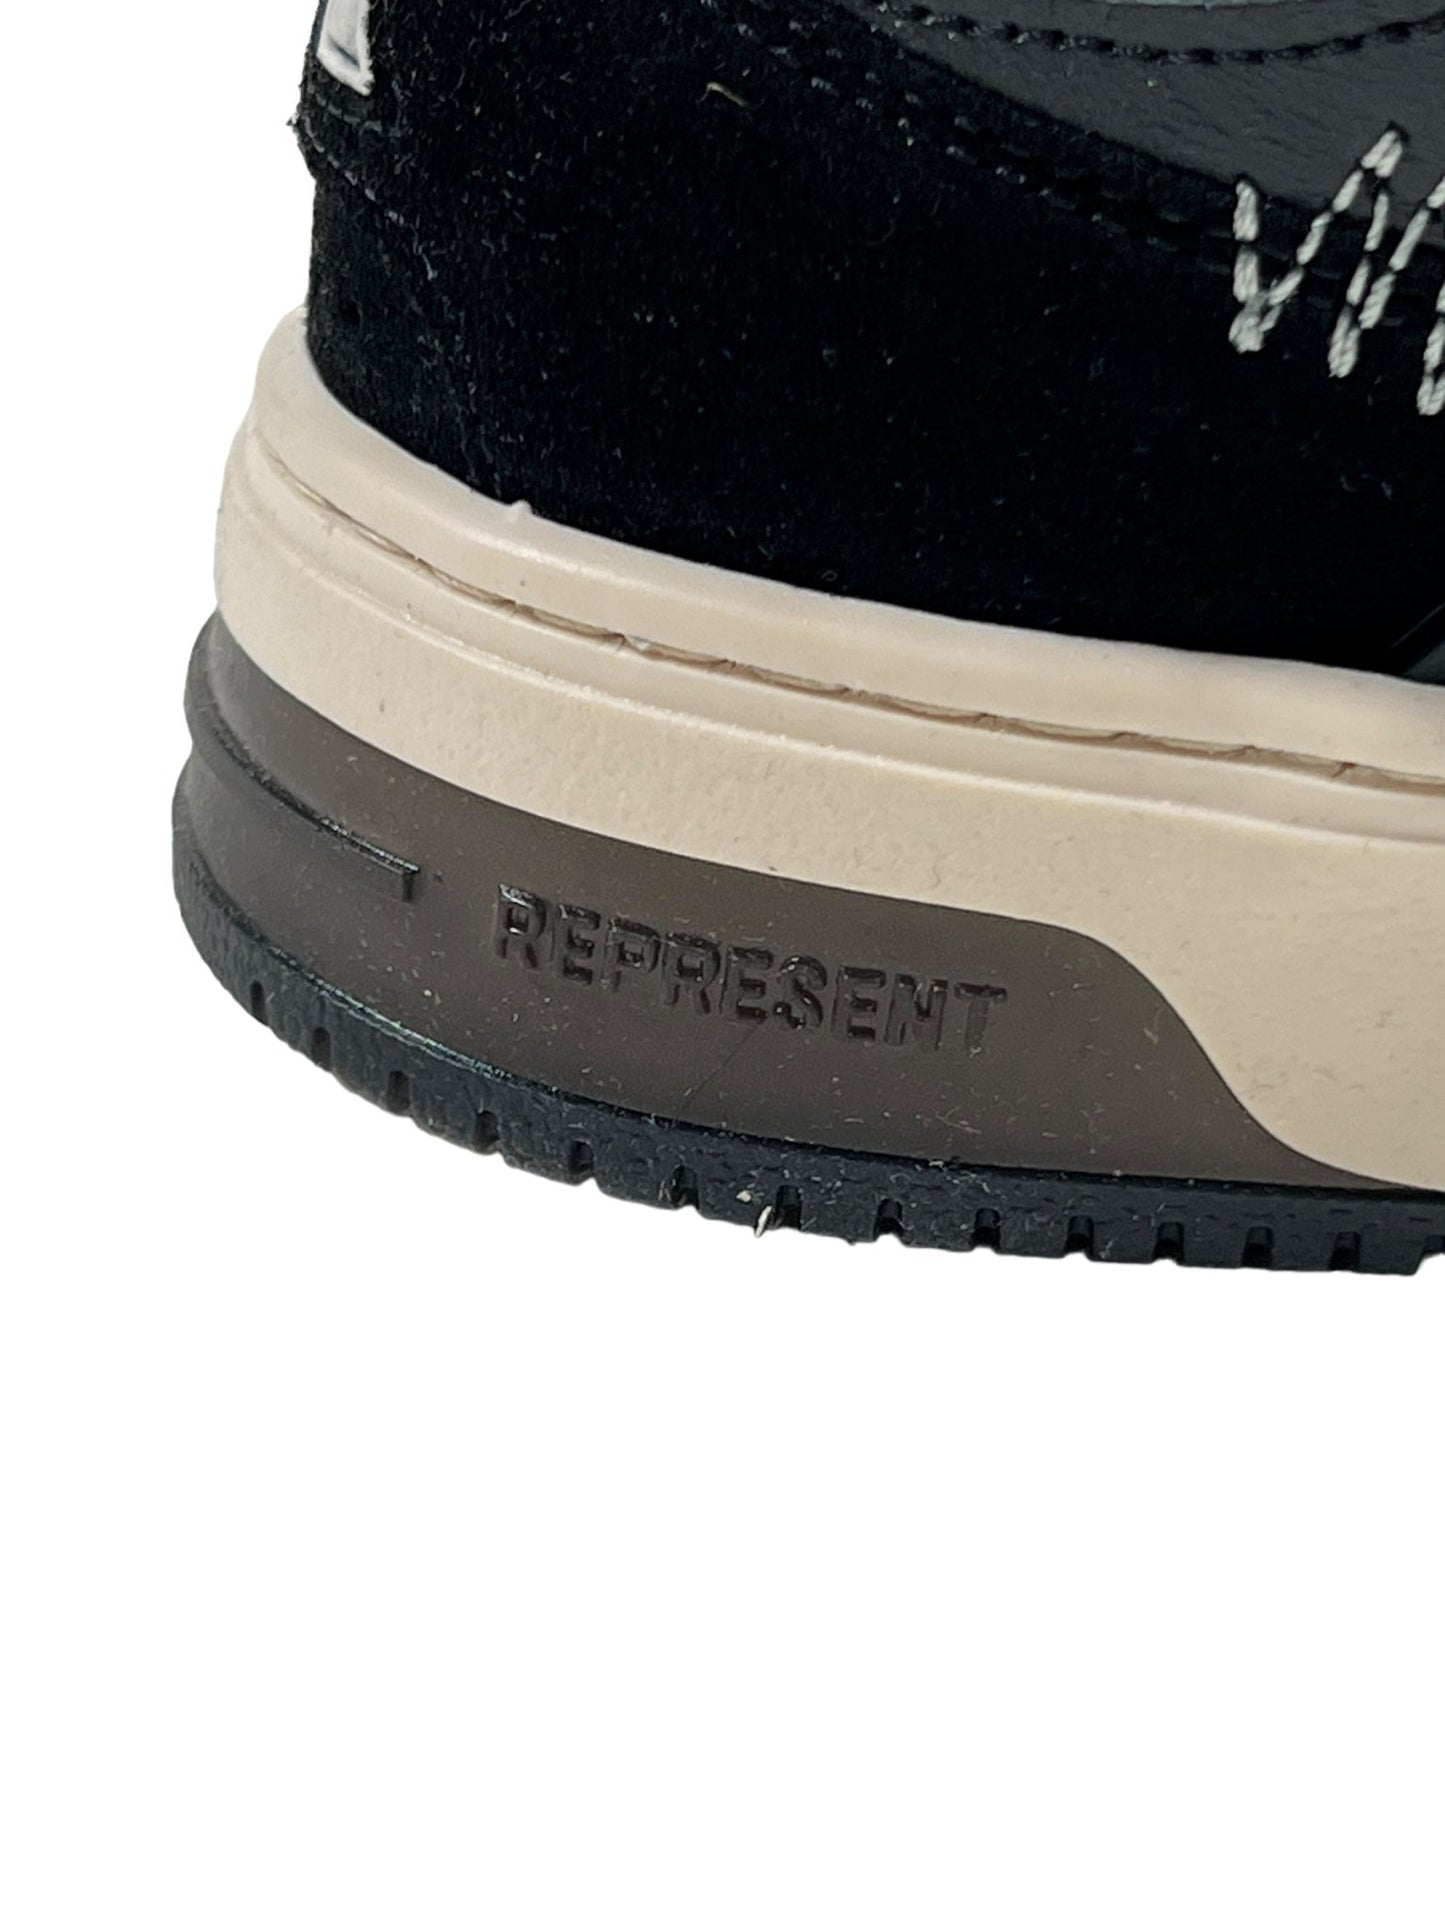 Sentence with replaced product and brand name: Close-up of a REPRESENT M12068-37 BULLY LEATHER BLACK sneaker with the word "represent" embossed on the beige sole, showing detailed stitching and retro skate-inspired tread.